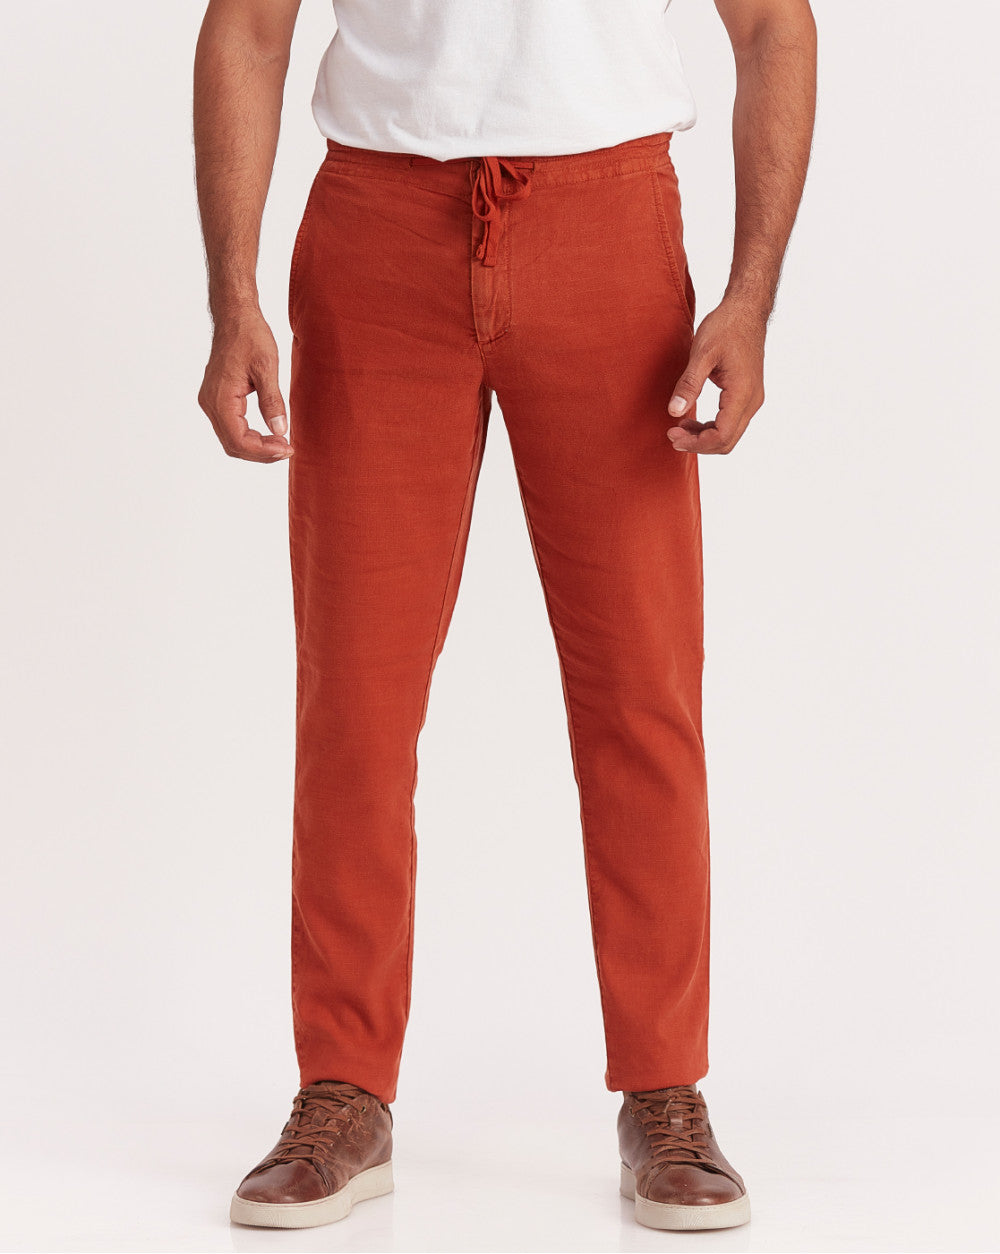 Tapered Fit Lounge Style Joggers - Rust